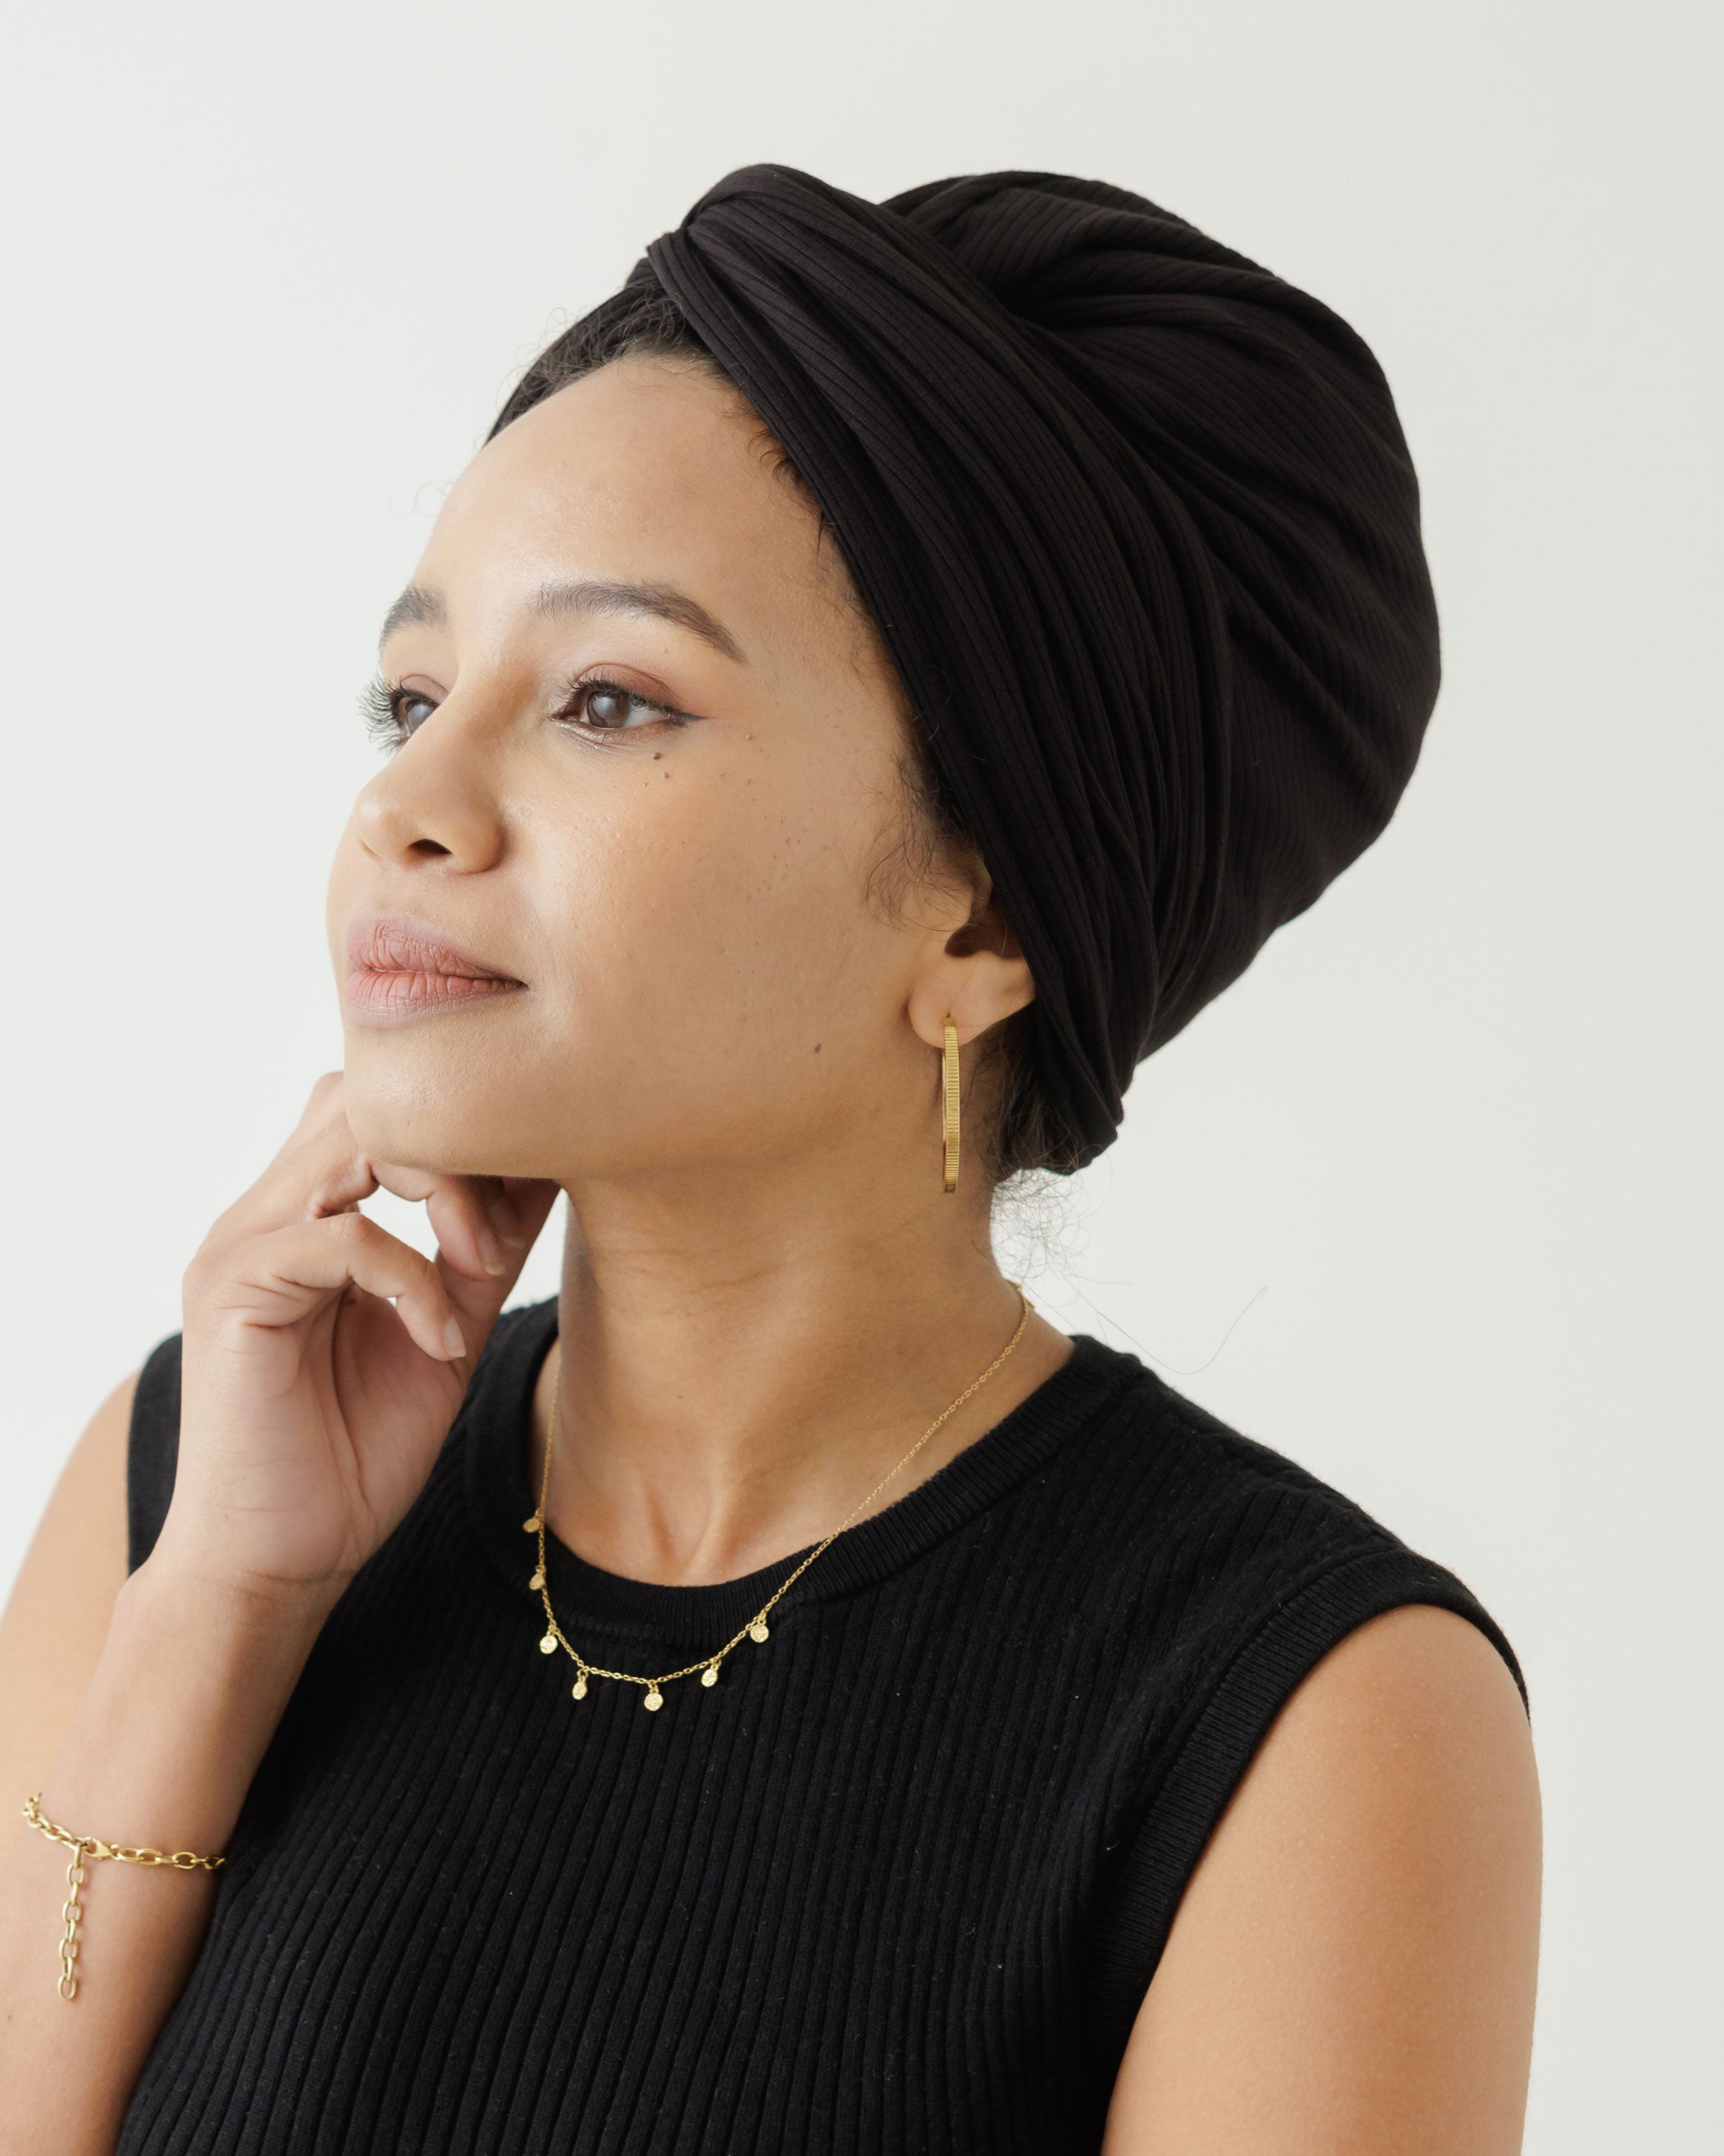 A Complicated and Beautiful Record of How Modern Headwraps Came to Be